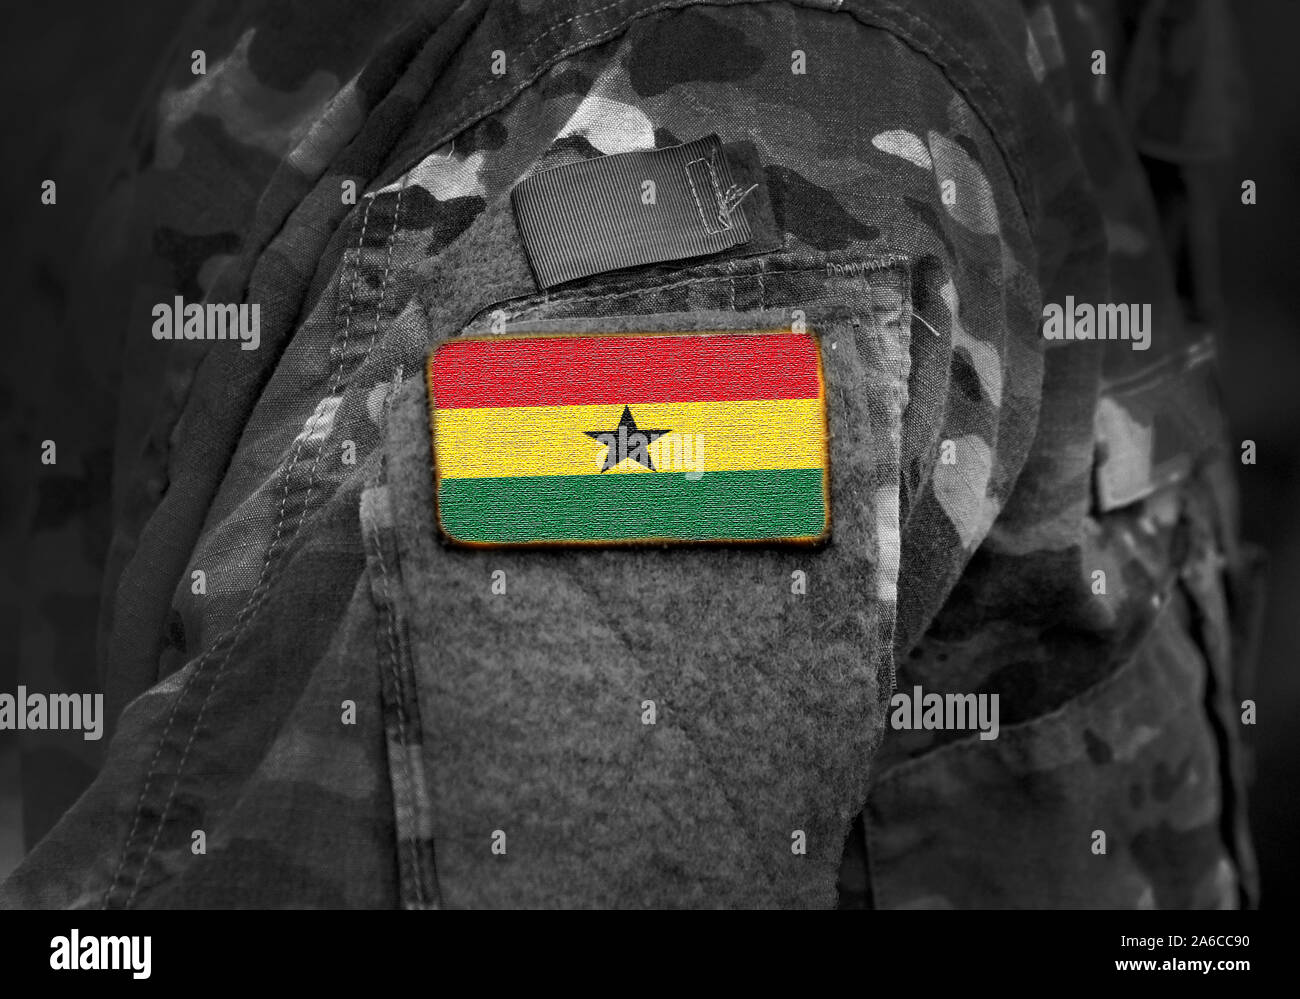 Flag of Ghana on military uniform. Army, troops, soldiers, Africa, (collage). Stock Photo